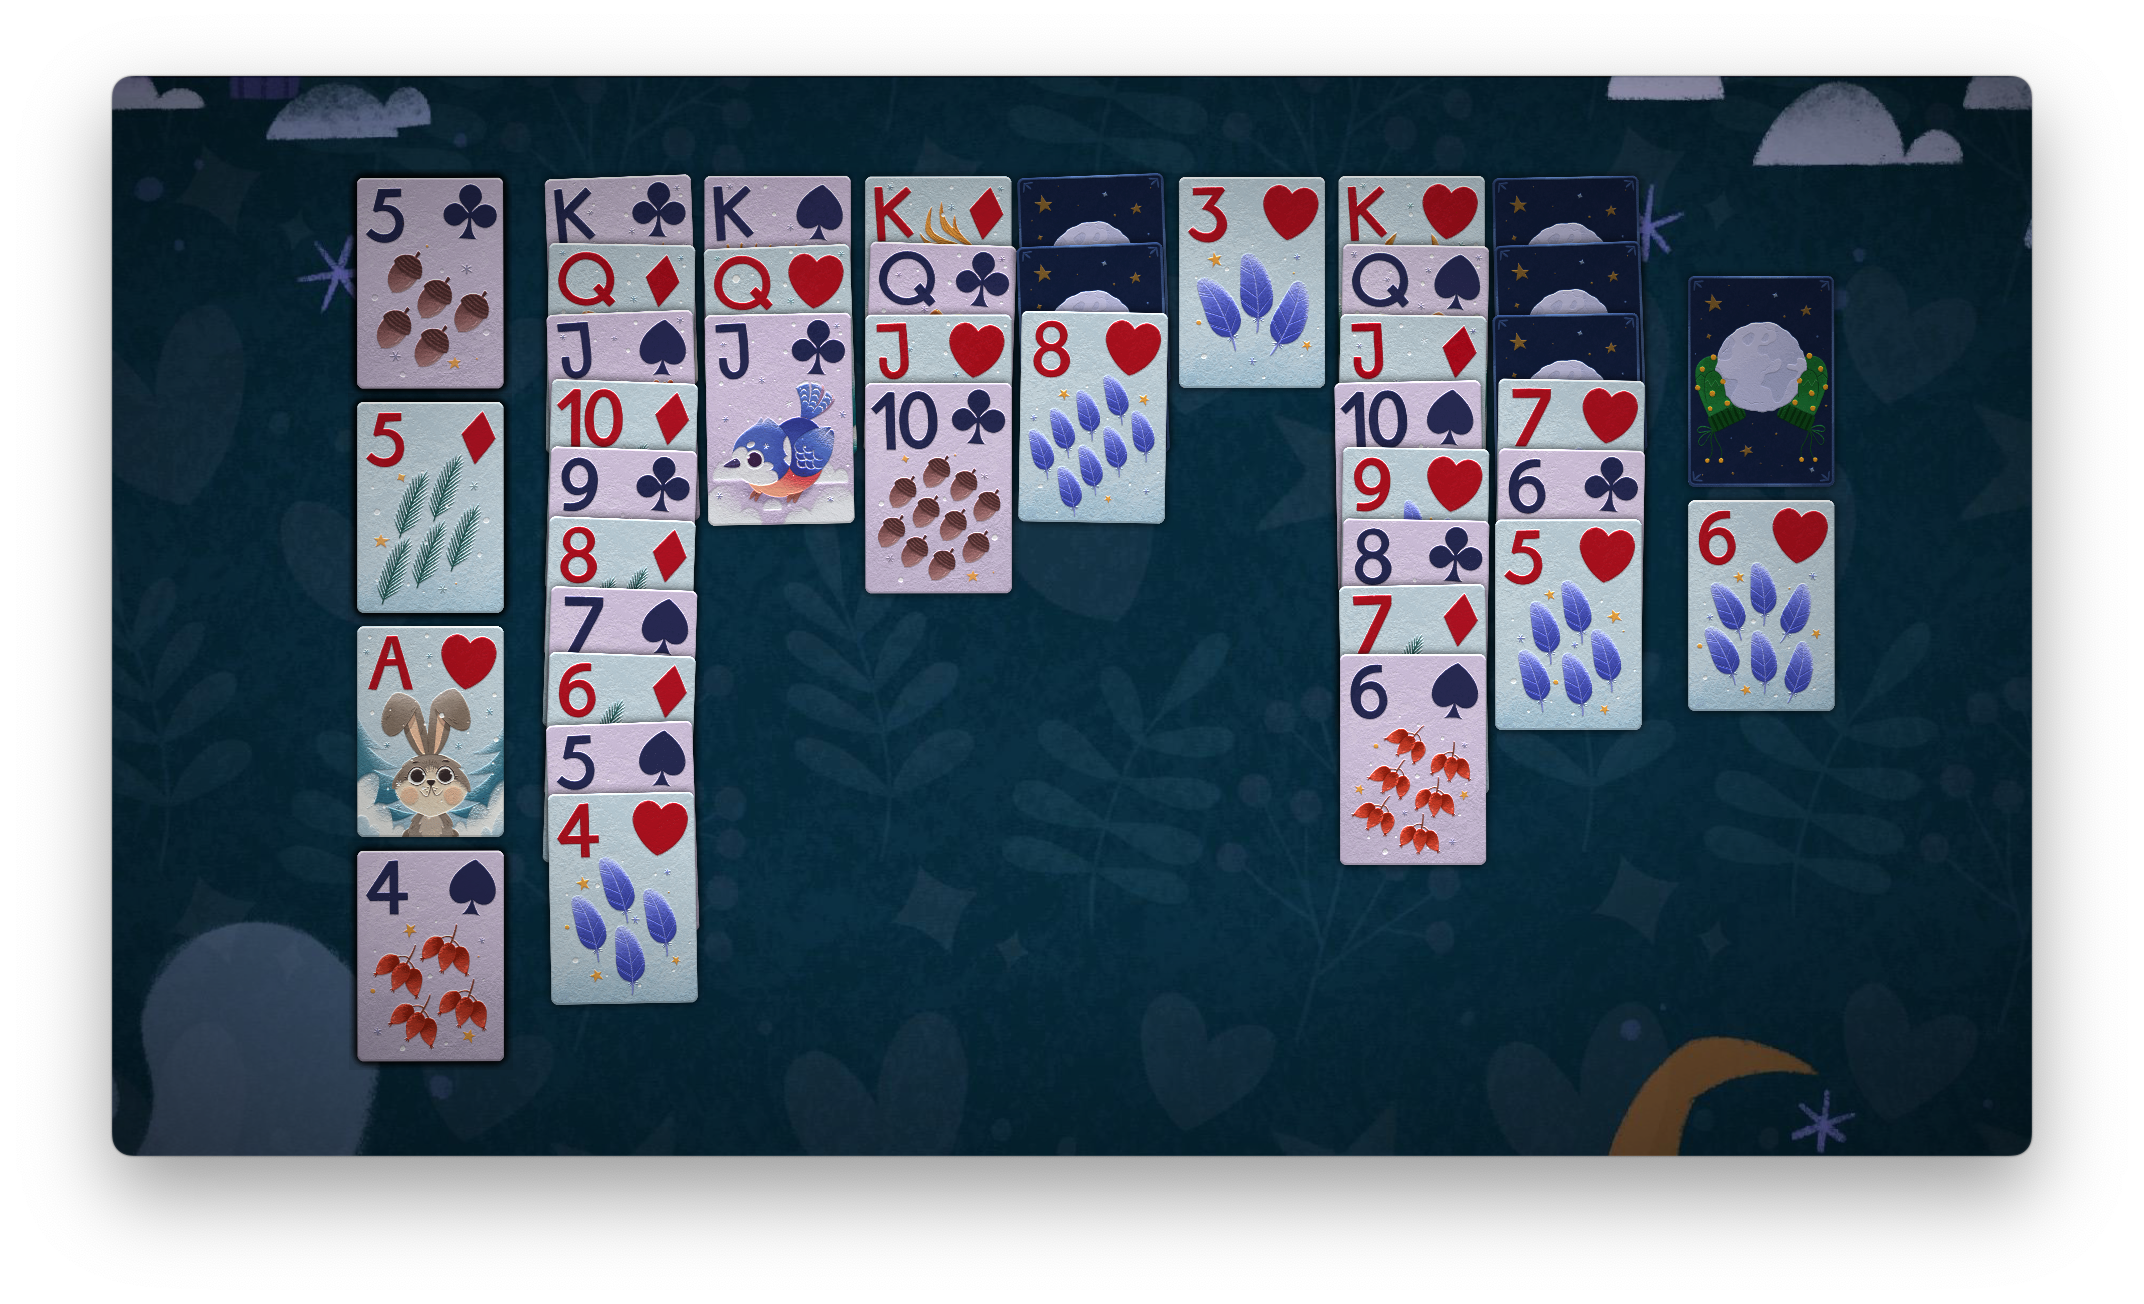 Spider Solitaire: Online Card Games King